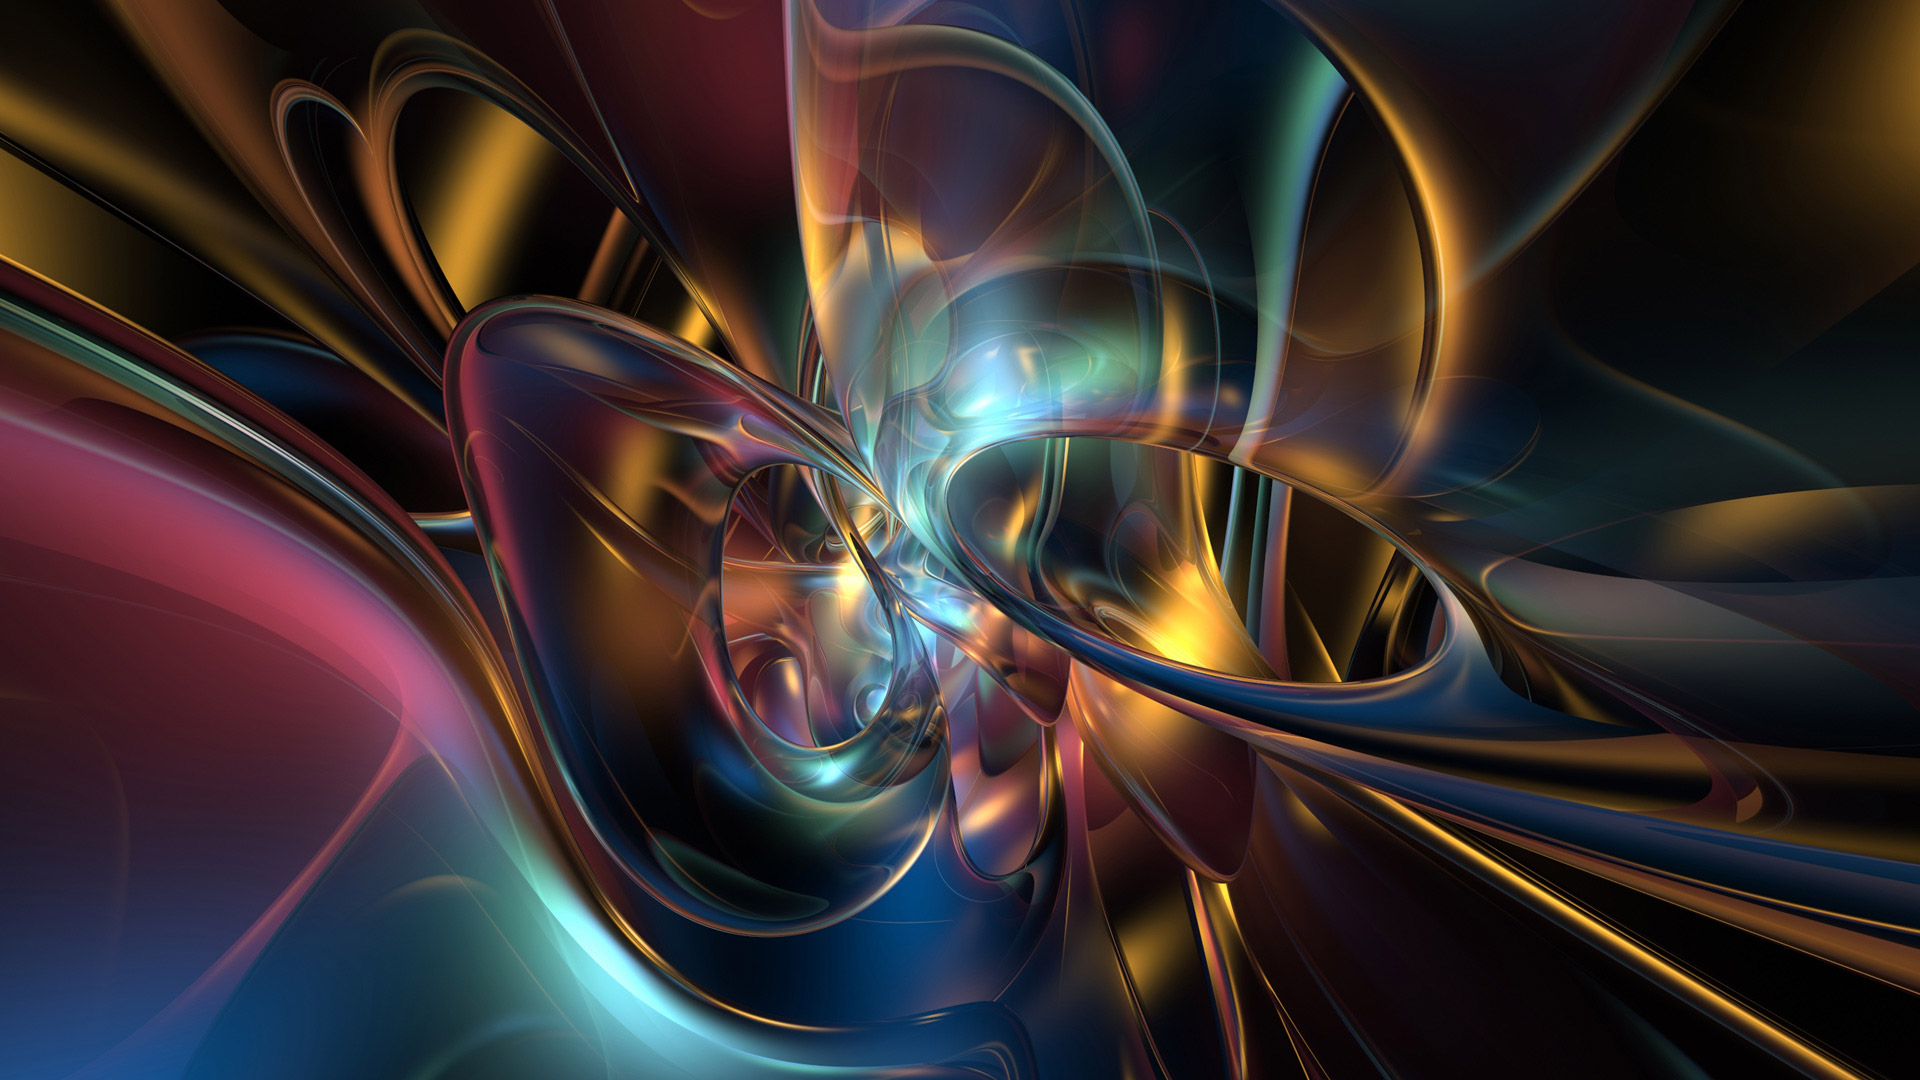 hd 3d abstract wallpapers 1080p #9